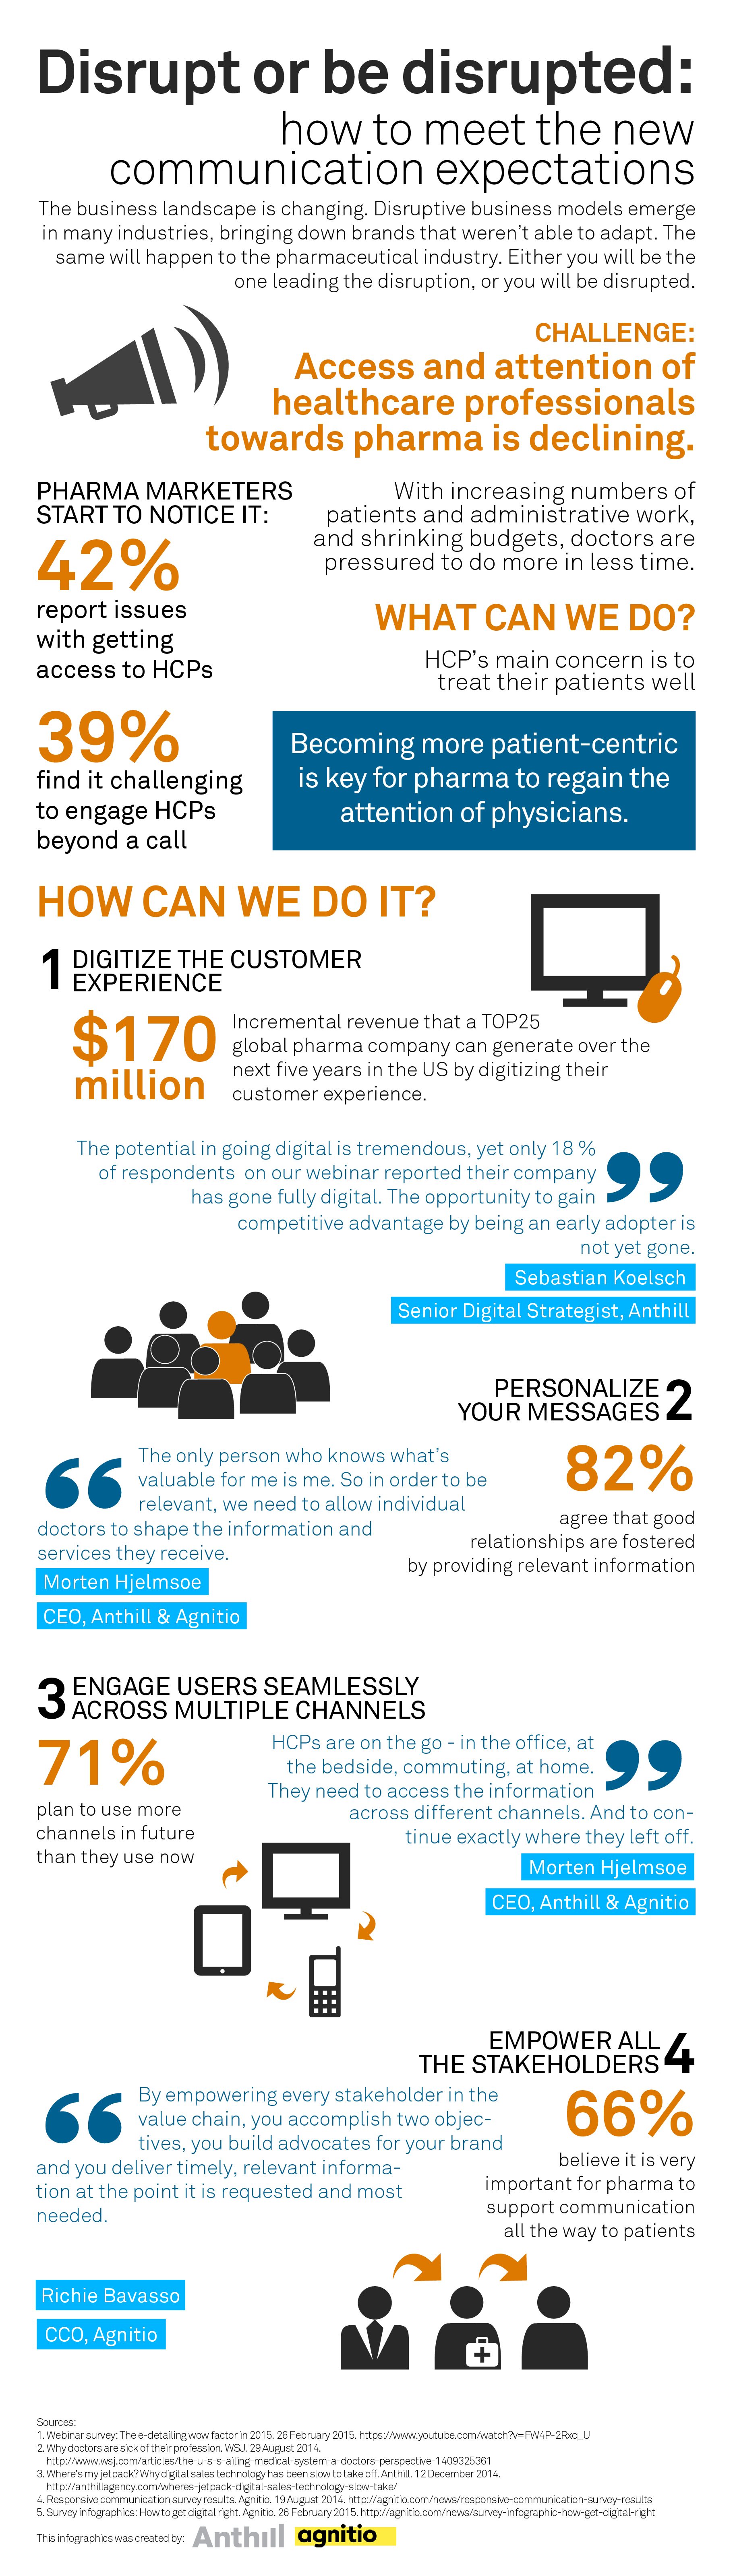 Infographic: How to meet the new communication expectations?